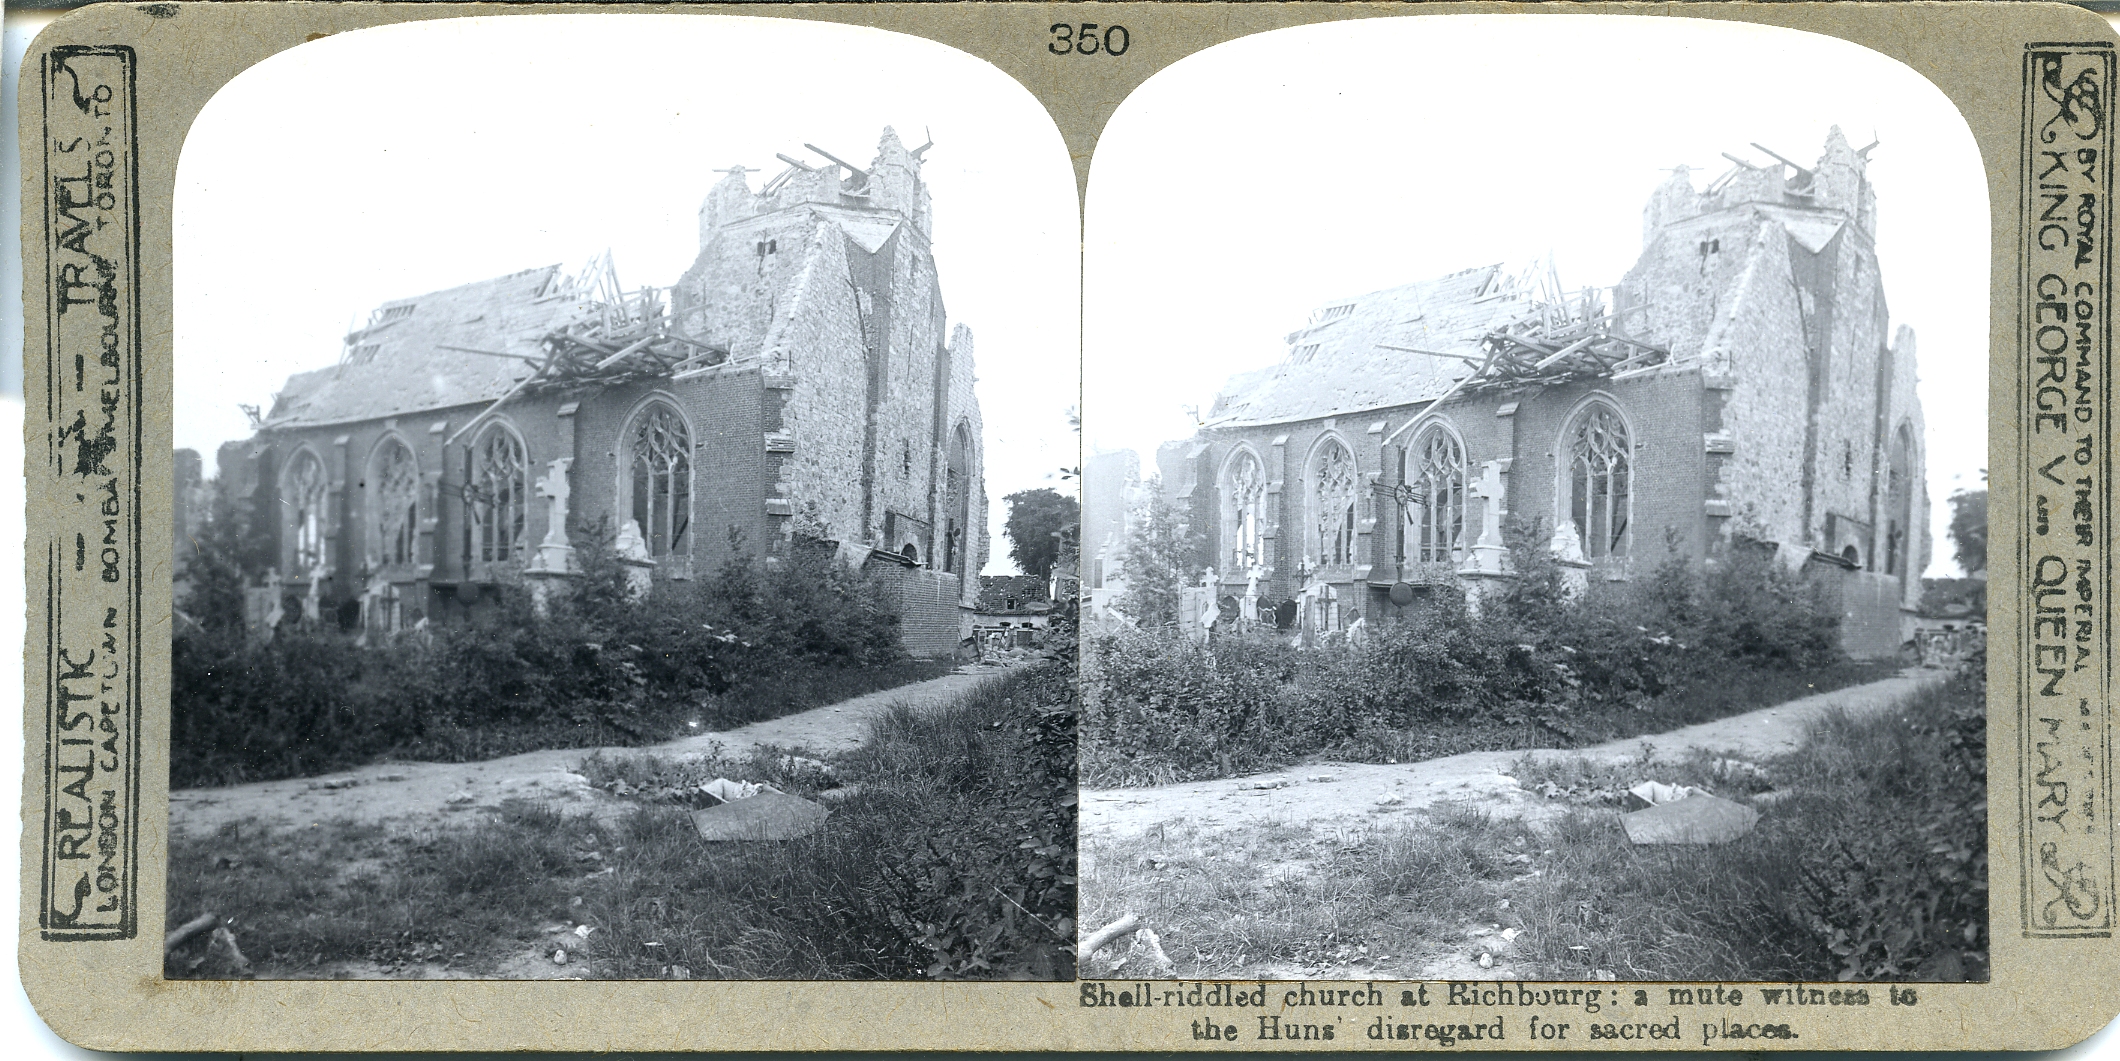 Shell-riddled church at Richbourg: a mute witness to the Huns' disregard for sacred places